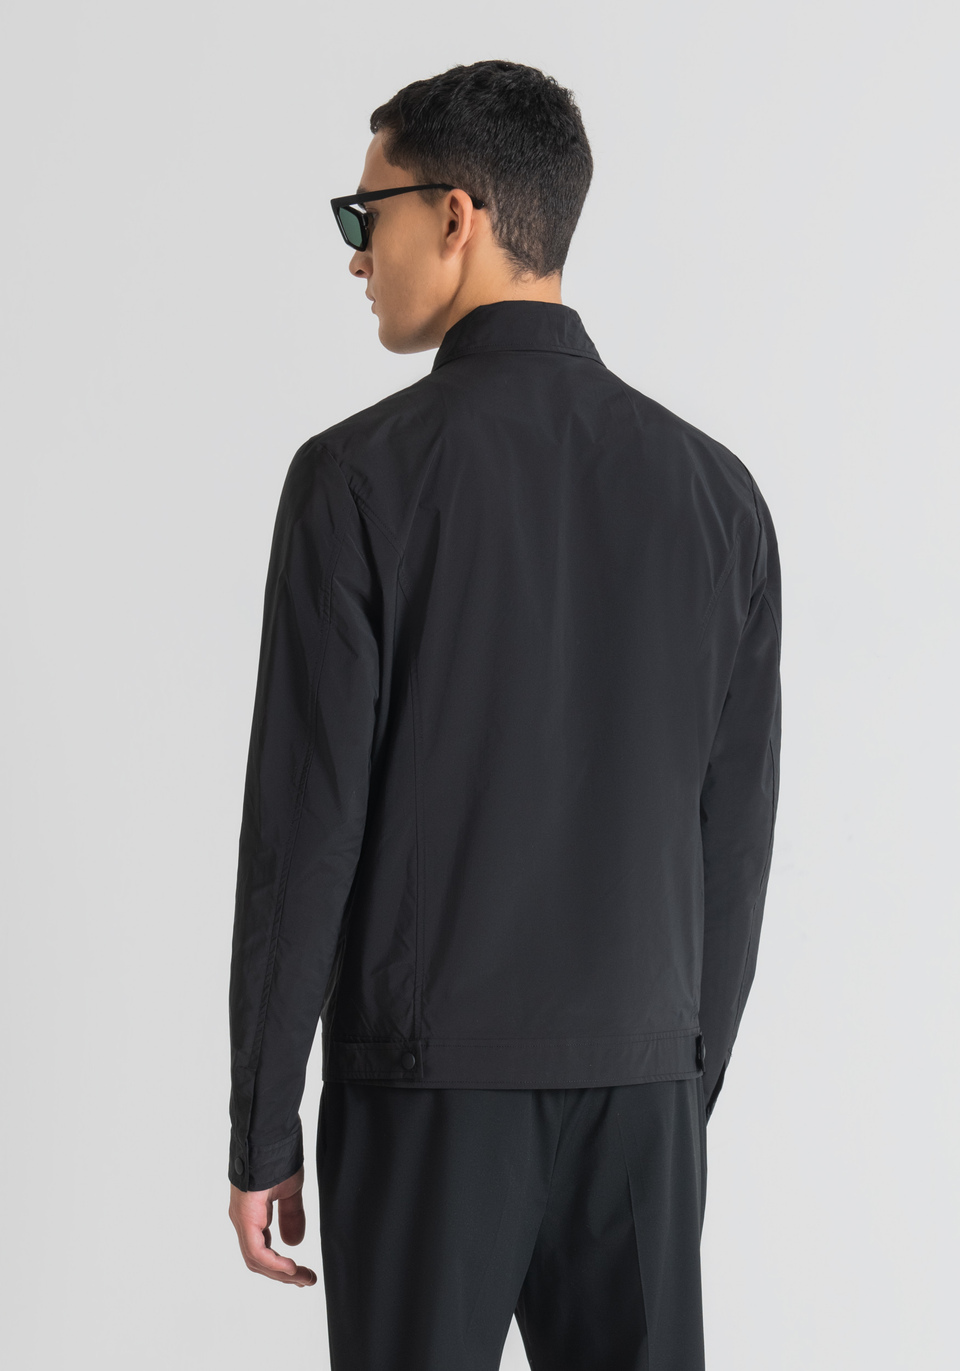 SLIM FIT JACKET IN TECHNICAL FABRIC WITH SHIRT COLLAR - Antony Morato Online Shop